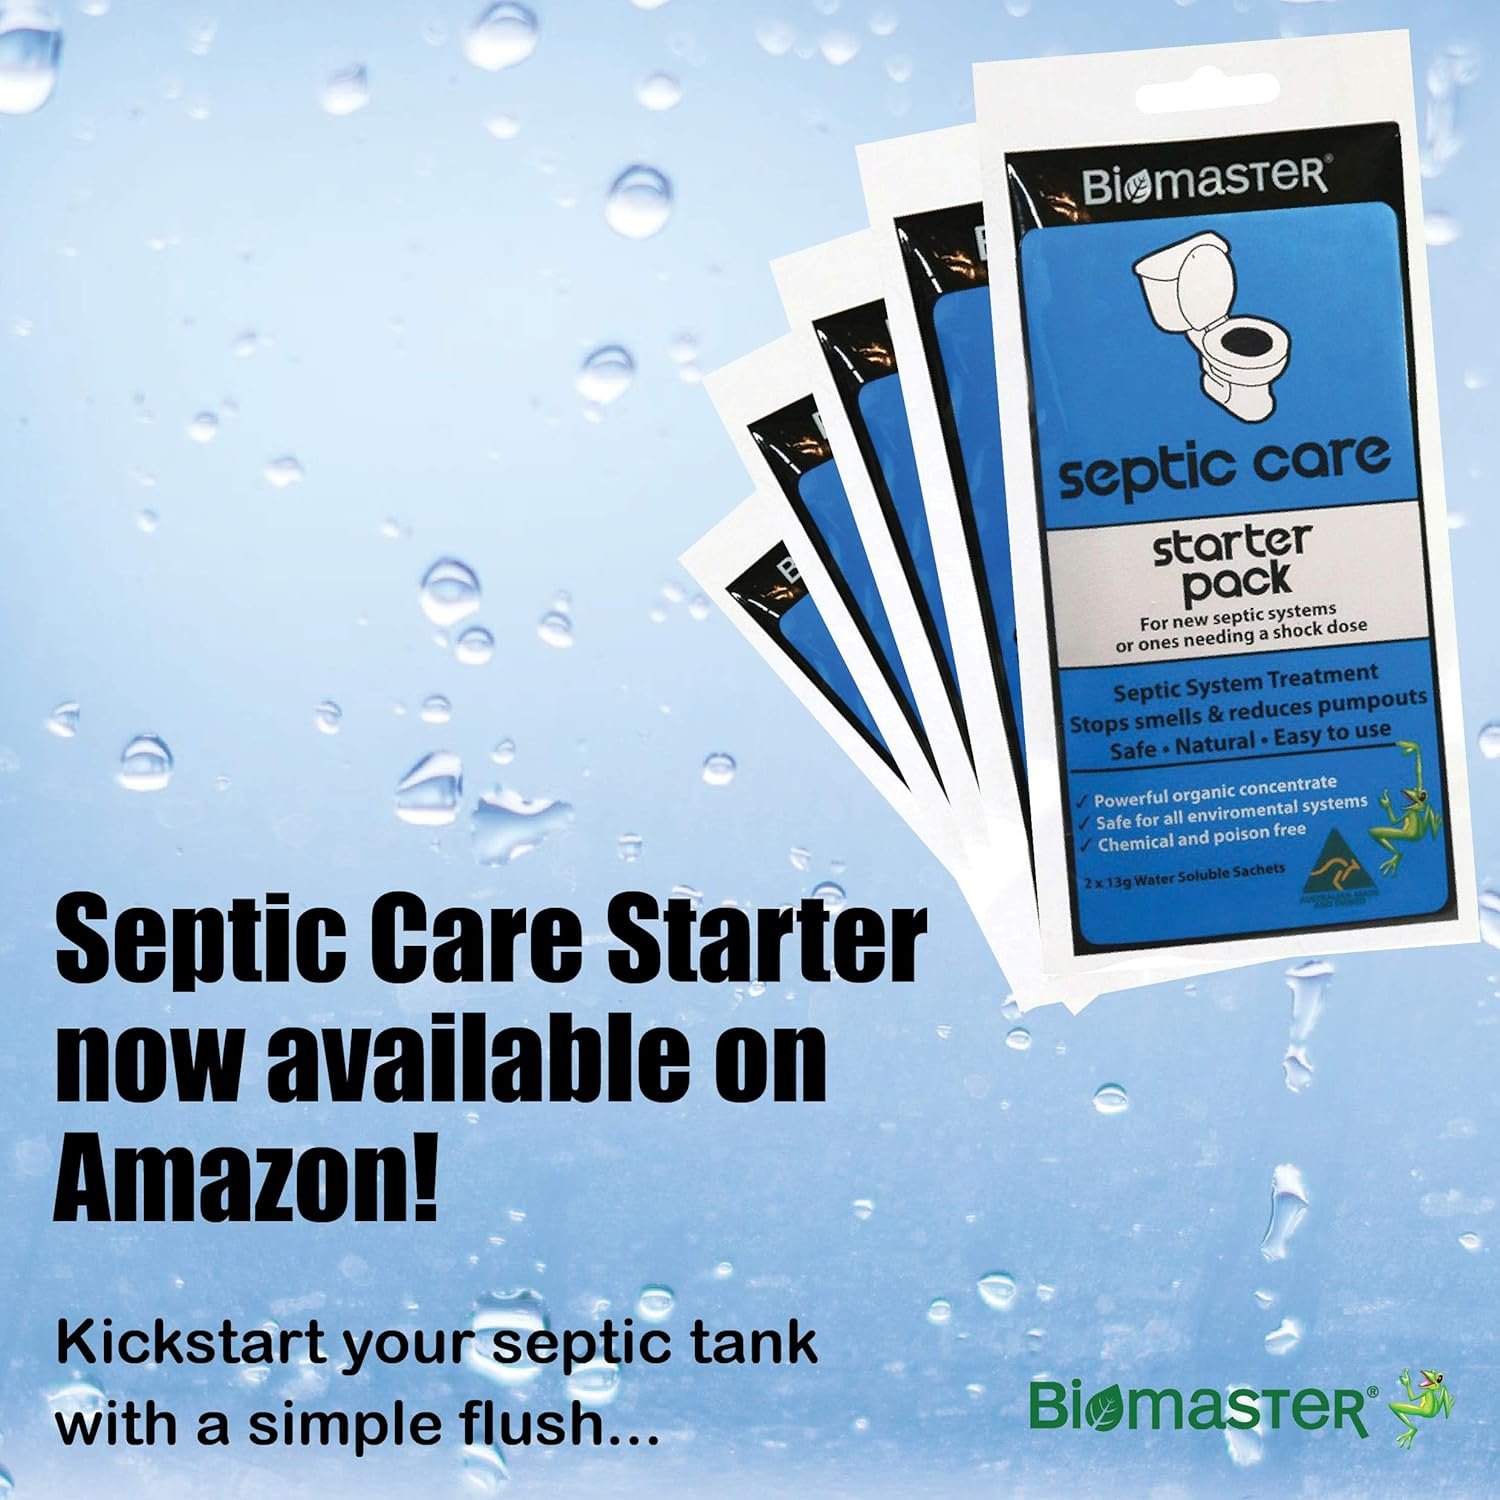 Septic Care Starter Pack Septic Tank Treatment, Stops Odors, Clears Drain Fields (100% Natural Concentrate, 2 Water Soluble Sachets)